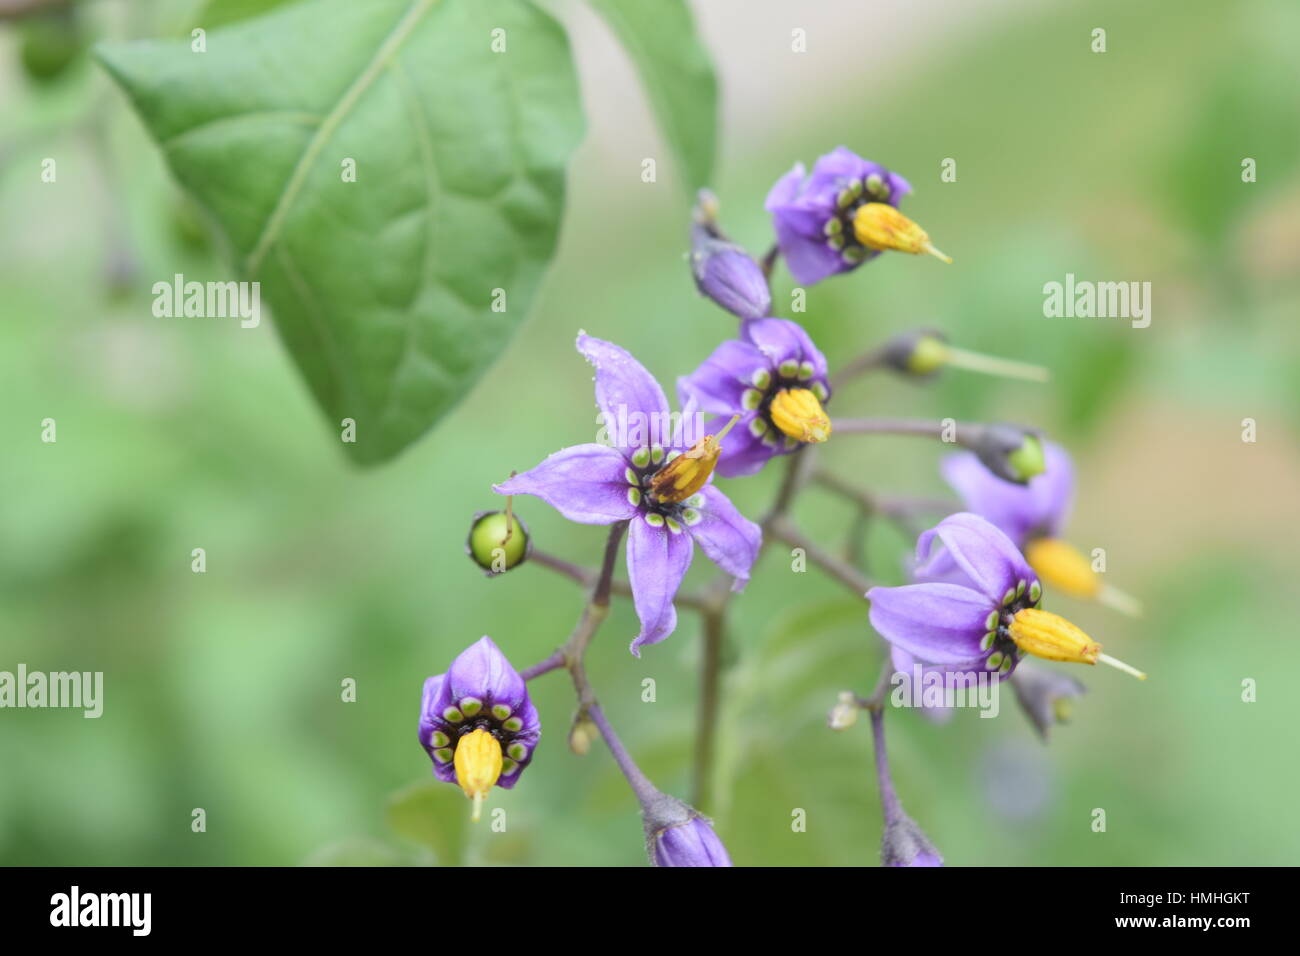 The Purple/Yellow Flower of the Toxic and Invasive Bittersweet Nightshade plant. Also know as Solanum Dulcamara, Snakeberry, and Blue Bindweed. Stock Photo